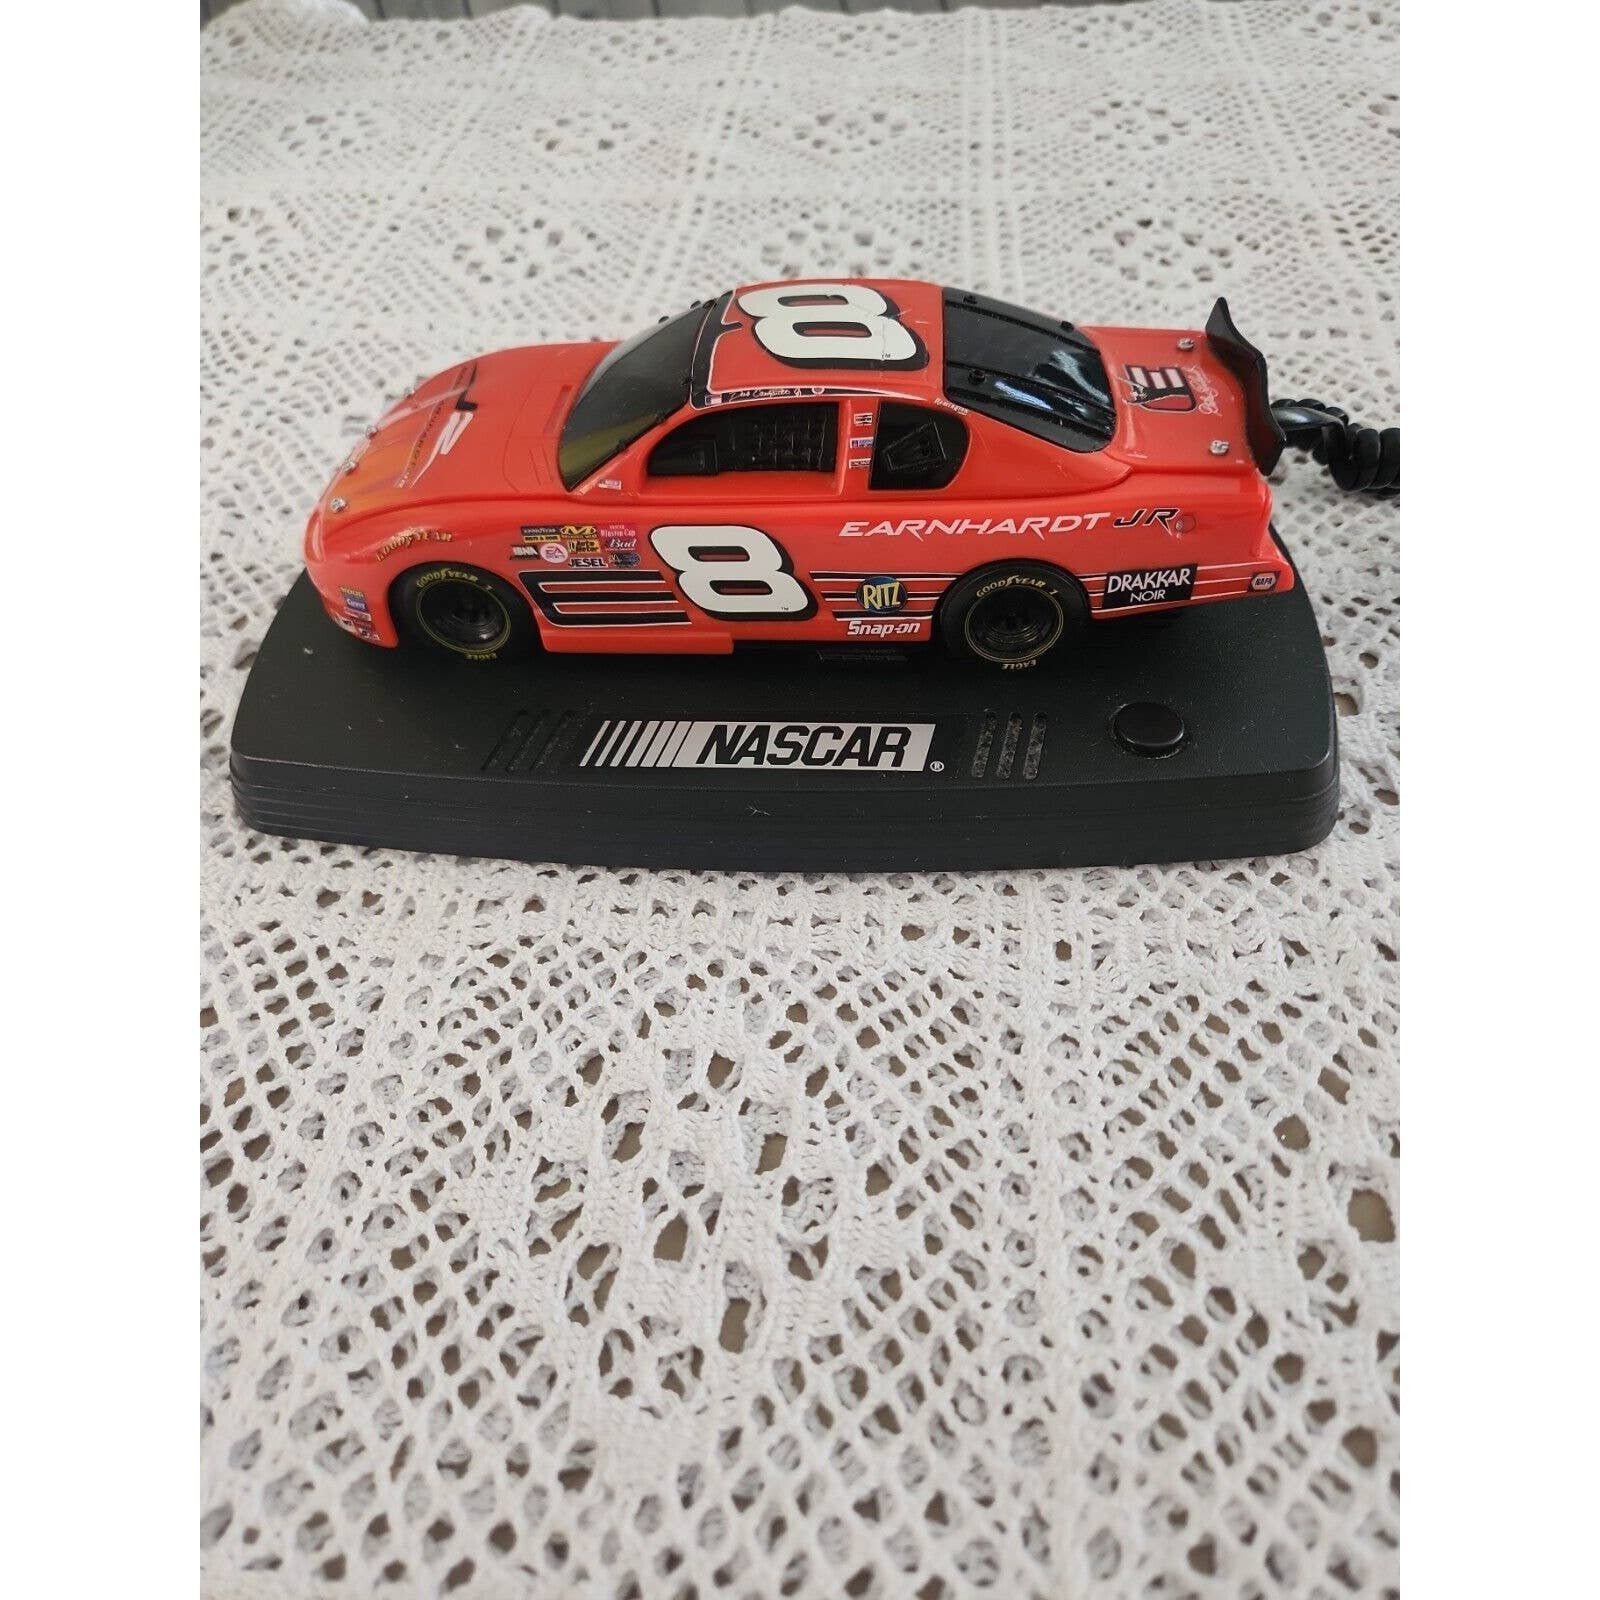 Dale Earnhardt Jr. Collectible Telephone Car #8 NASCAR 5ceq8Zcpr